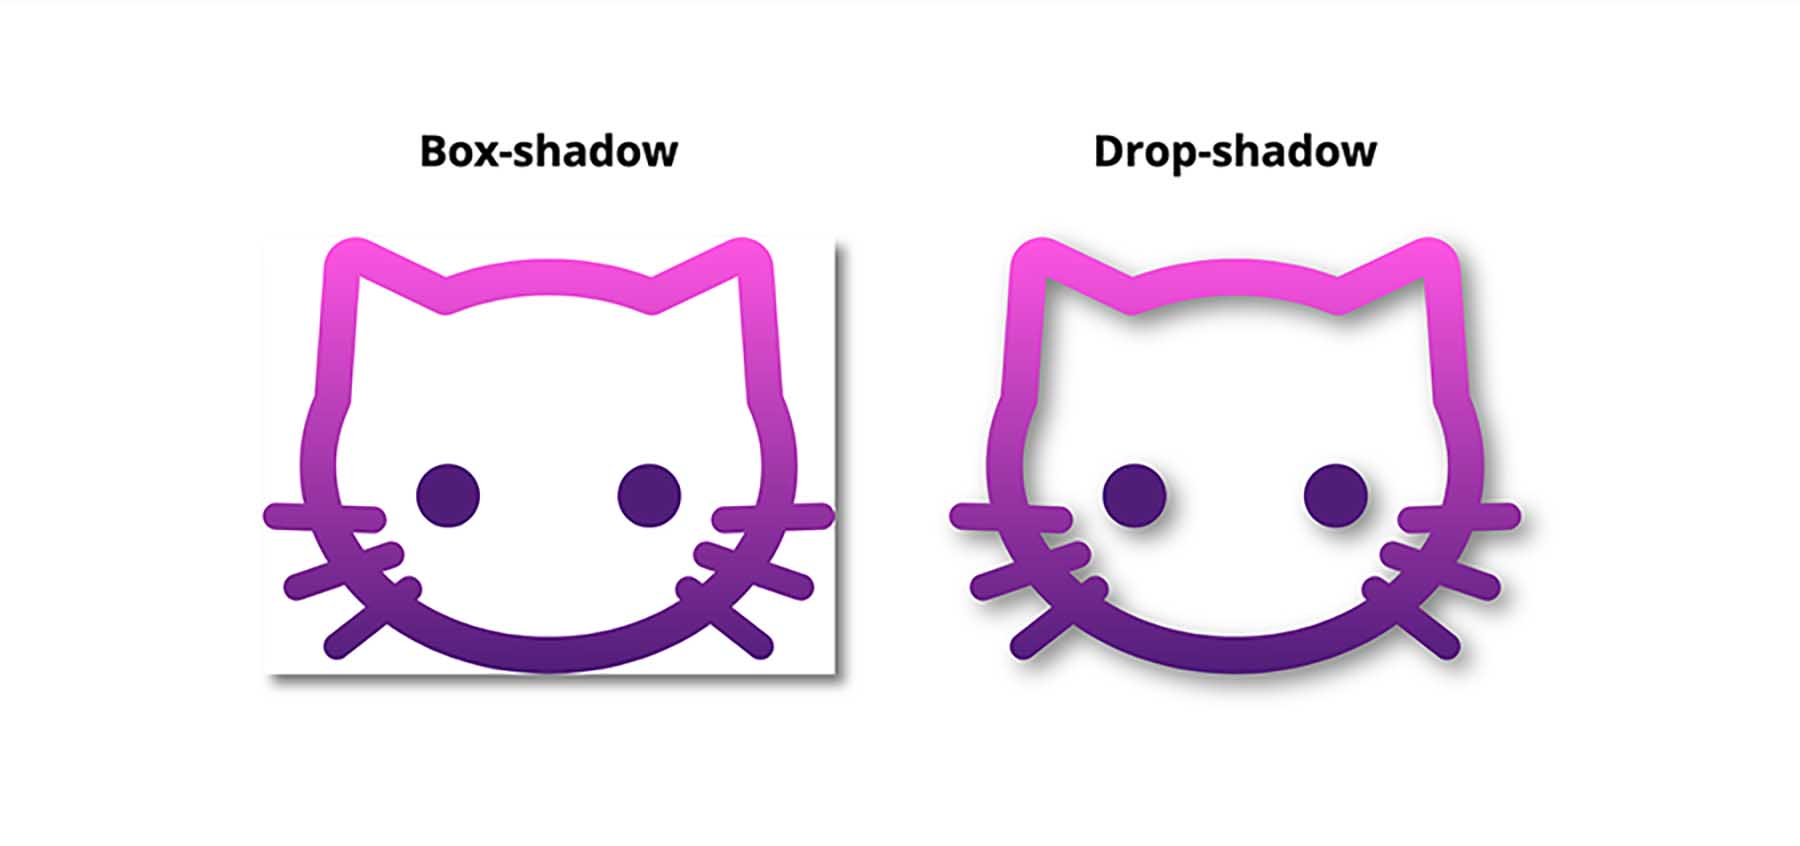 A pink cat logo with box-shadow on the left and the same logo with drop-shadow on the right